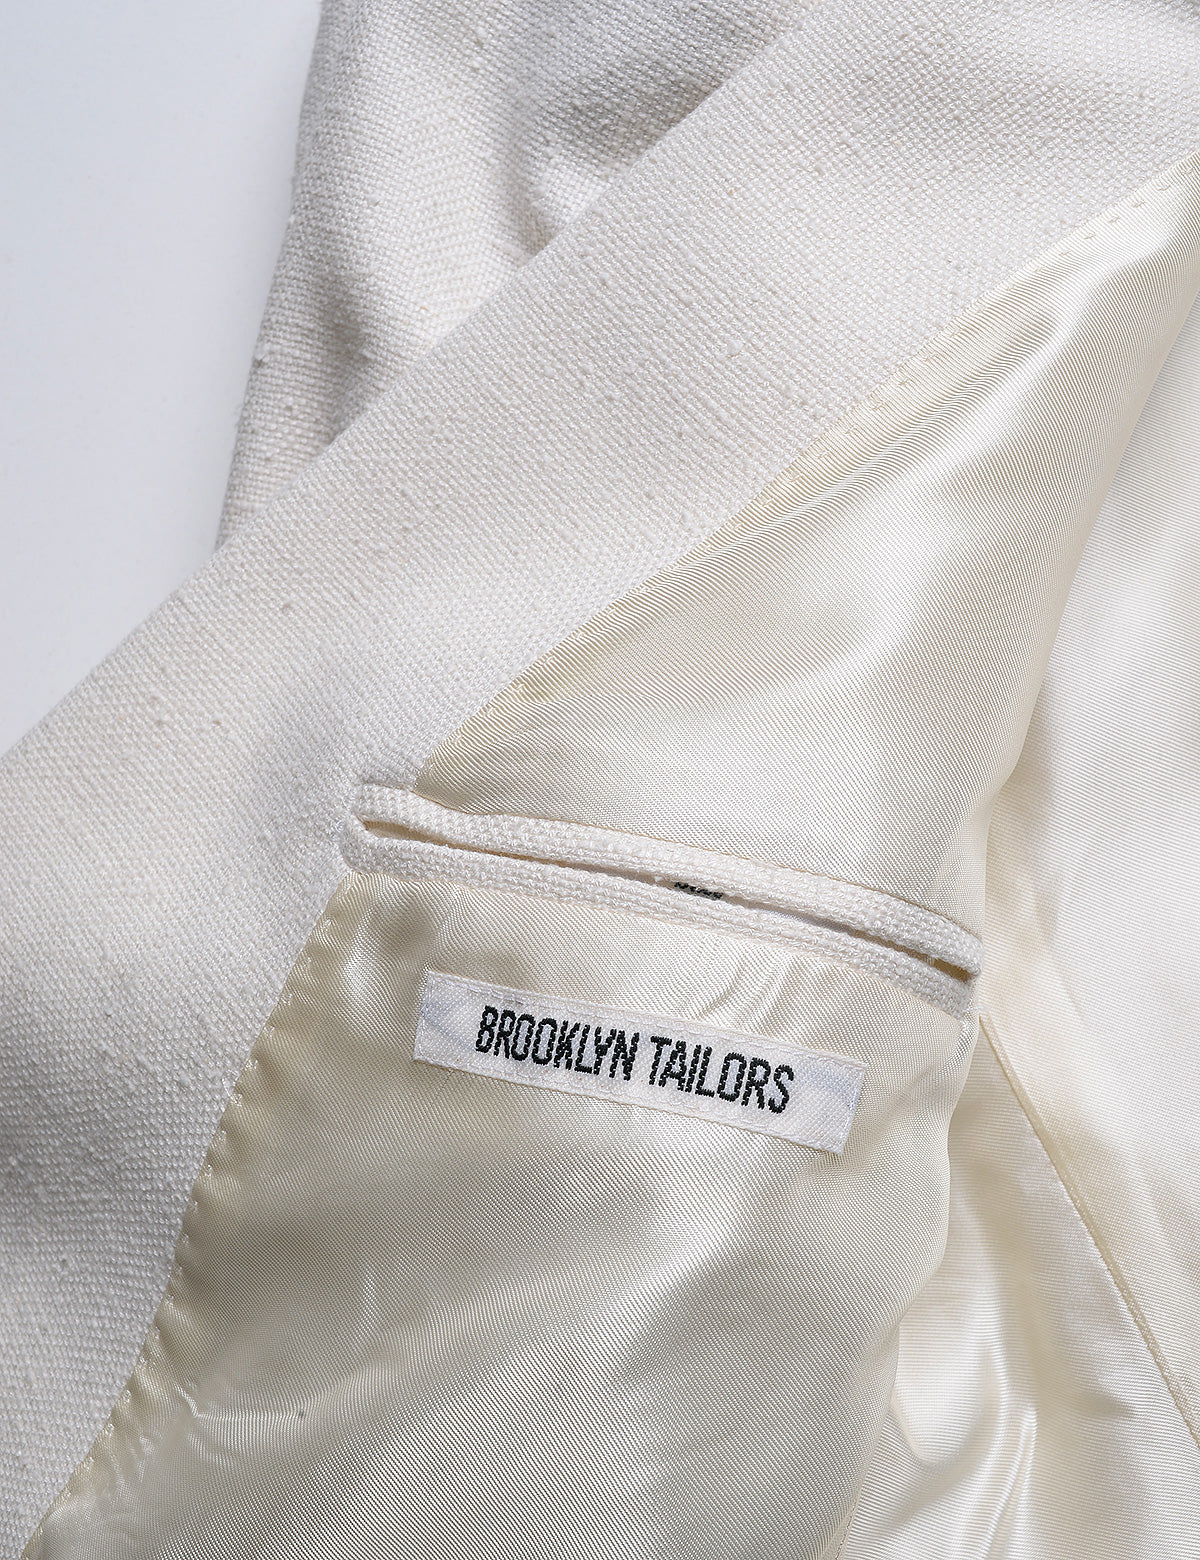 Detail of Brooklyn Tailors BKT50 Shawl Collar Dinner Jacket in Silk & Wool Hopsack - Ivory showing Brooklyn Tailors label on the interior of the jacket